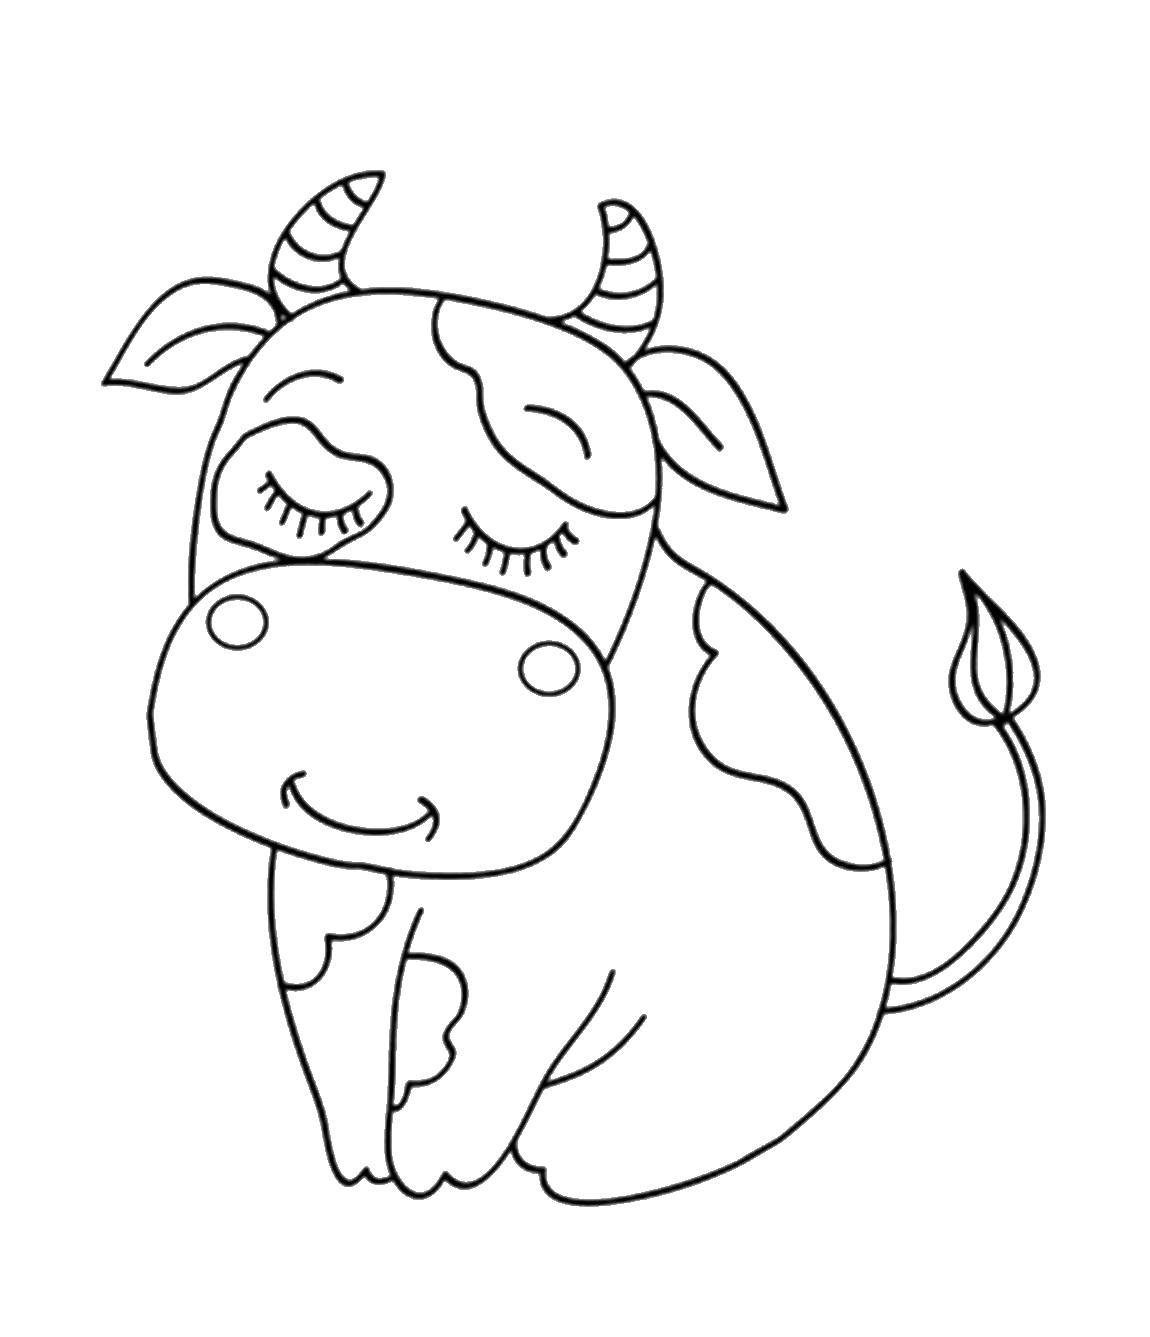 Coloring Cow. Category Pets allowed. Tags:  cow, milk.